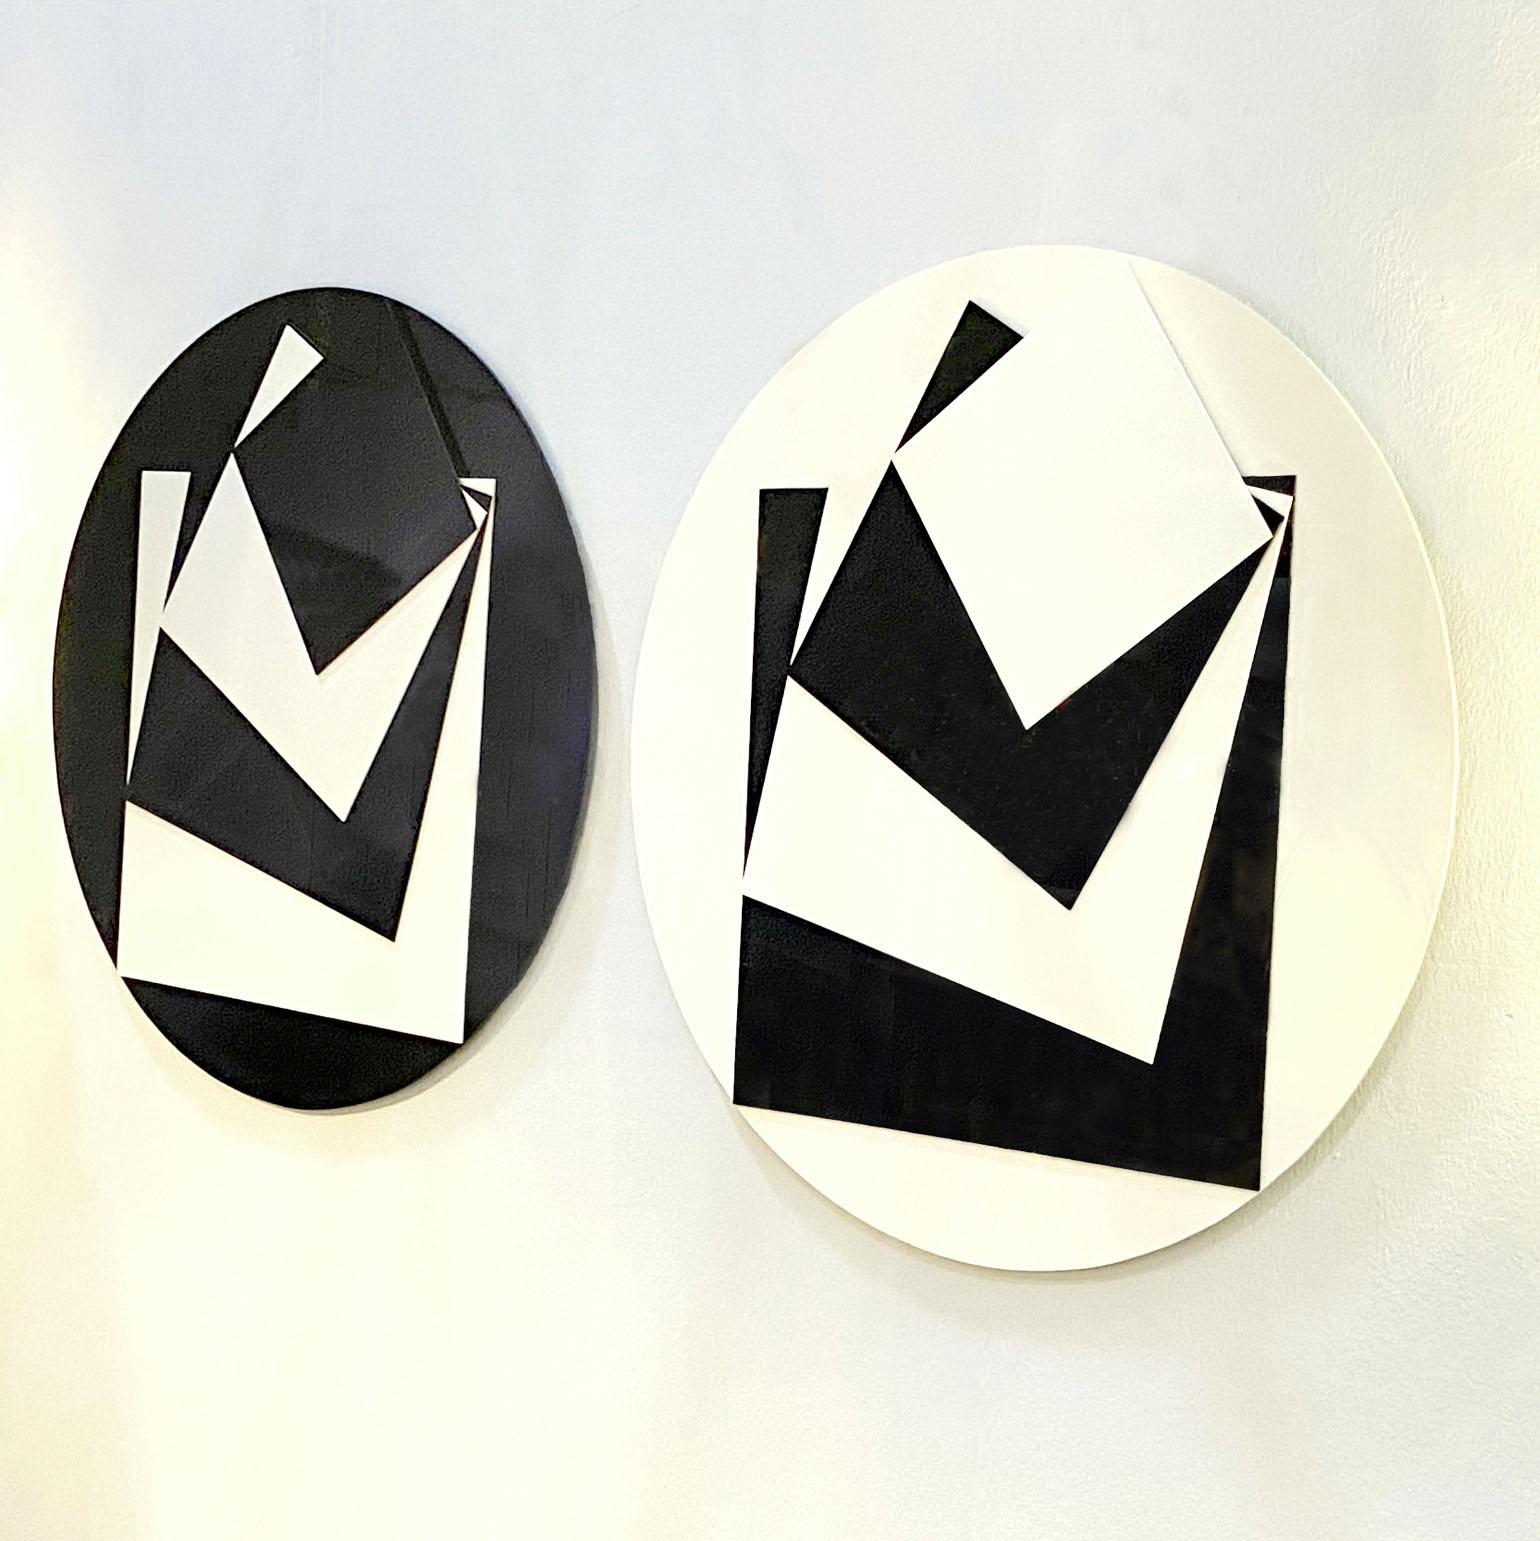 Pair of Minimalist abstract round Black & White Perspex artworks, by Ciryl Lixenberg, British, 1960's (1932 - 2015). The reliefs are build with squares in alternating black and white sheets of Perspex mounted on a Perspex / acrylyc circular